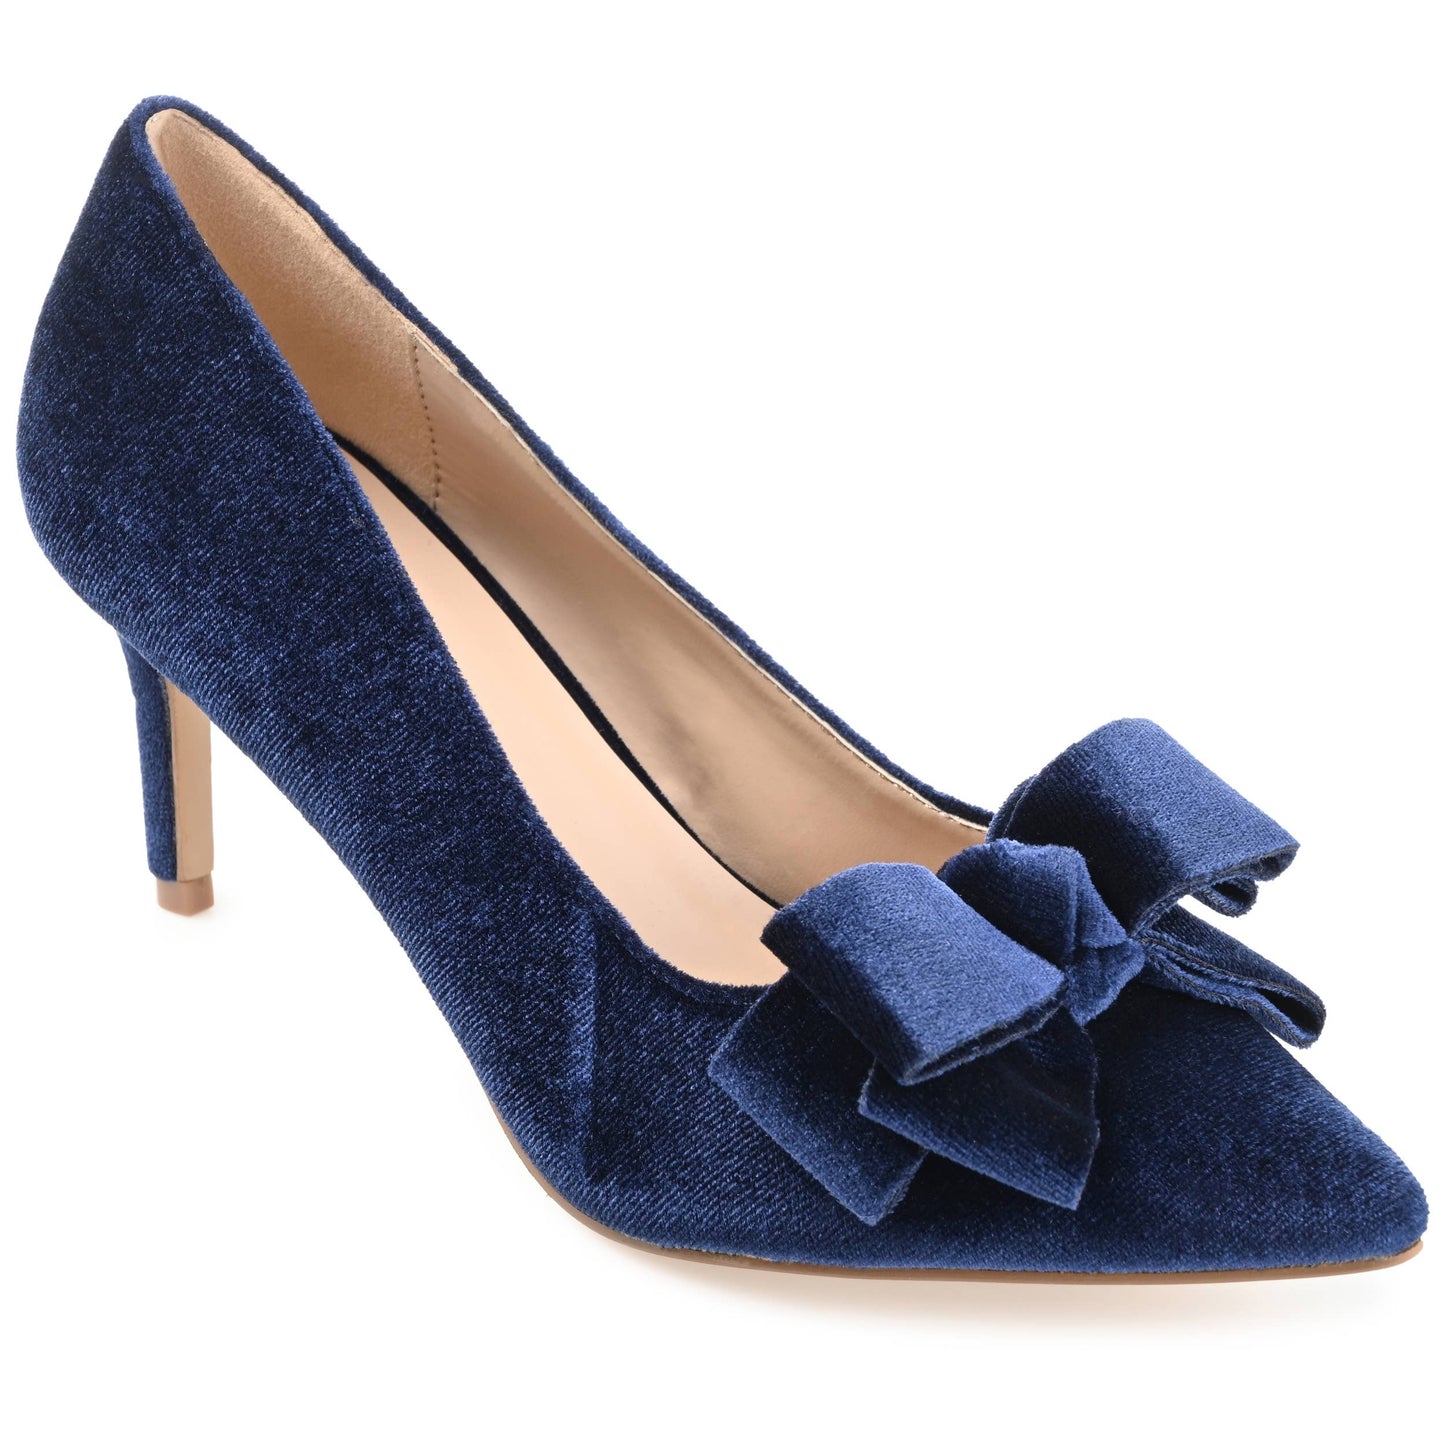 Journee Collection - Journee Collection Women's Crystol Pump